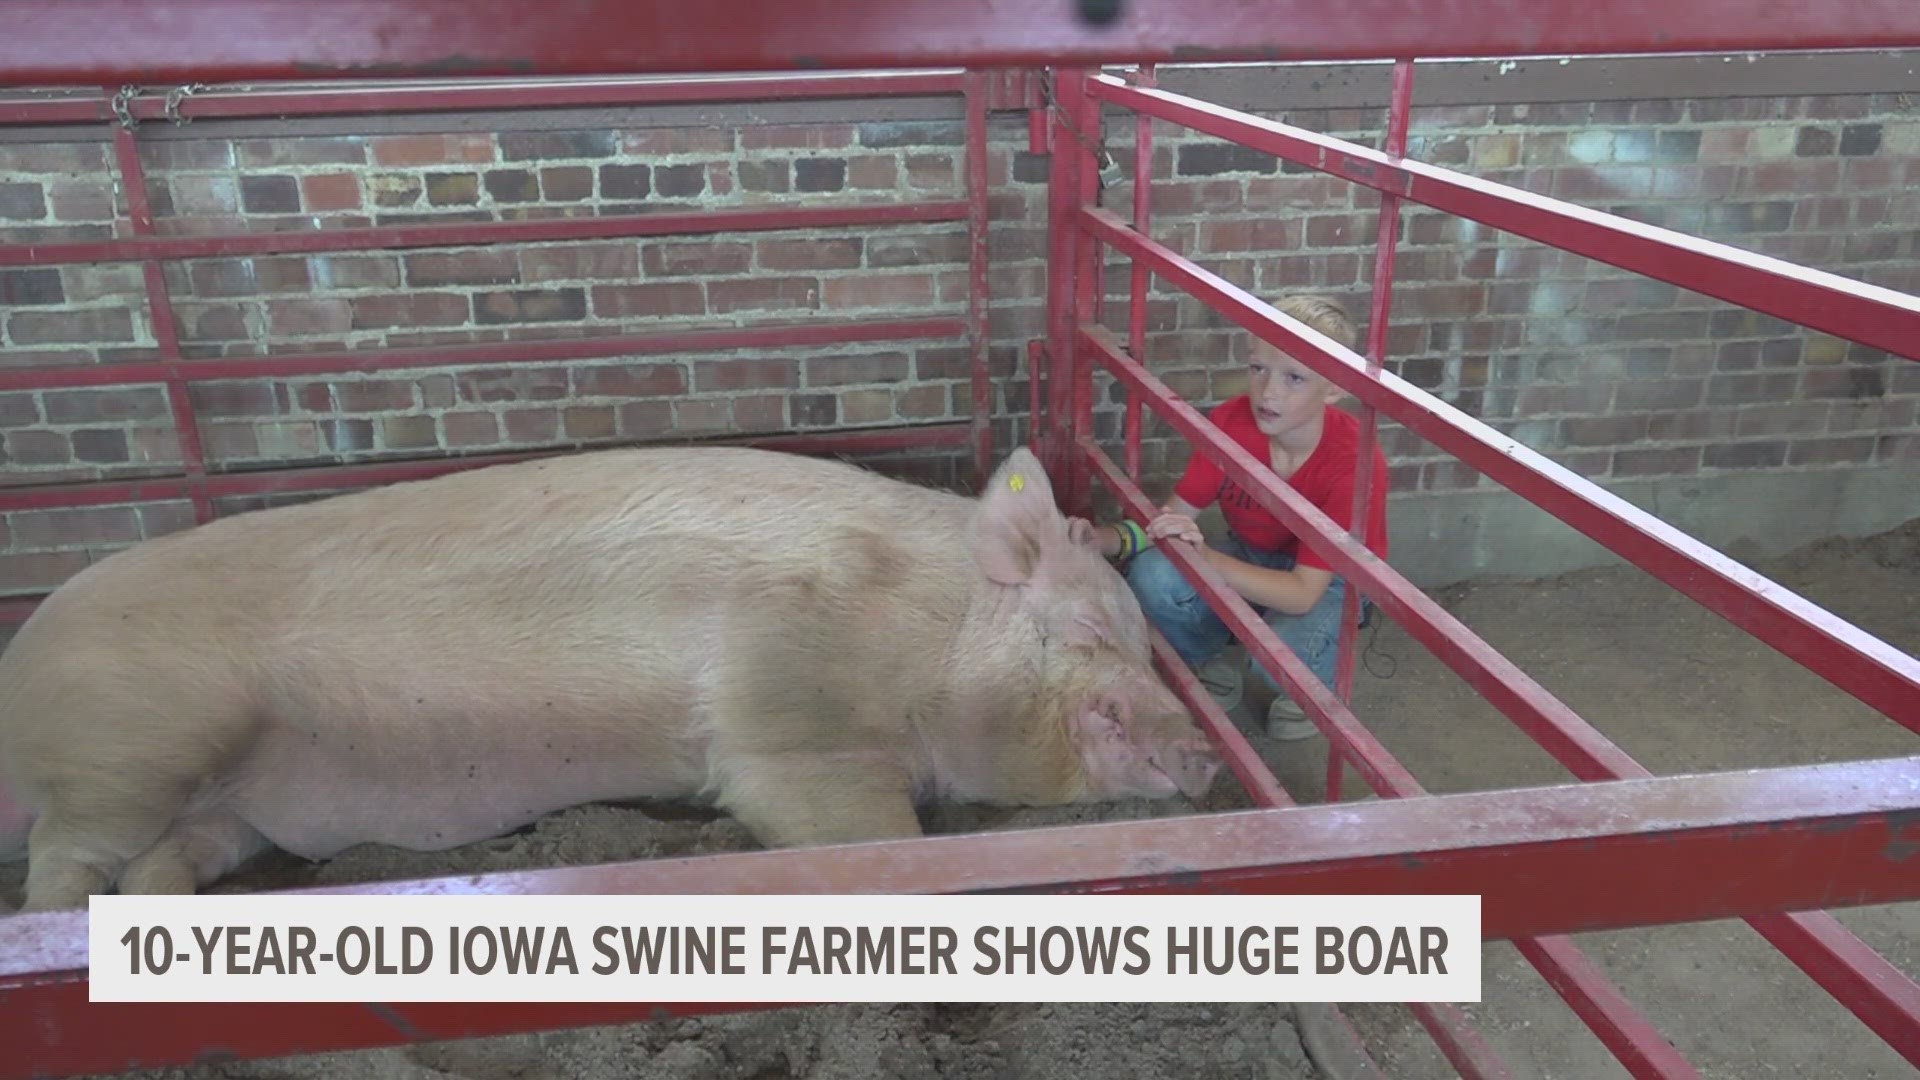 10-year-old Jack Theobald has been raising his sleepy giant — a 894 pound hog named Big Joe — to compete in the Iowa State Fair's Big Boar Competition.